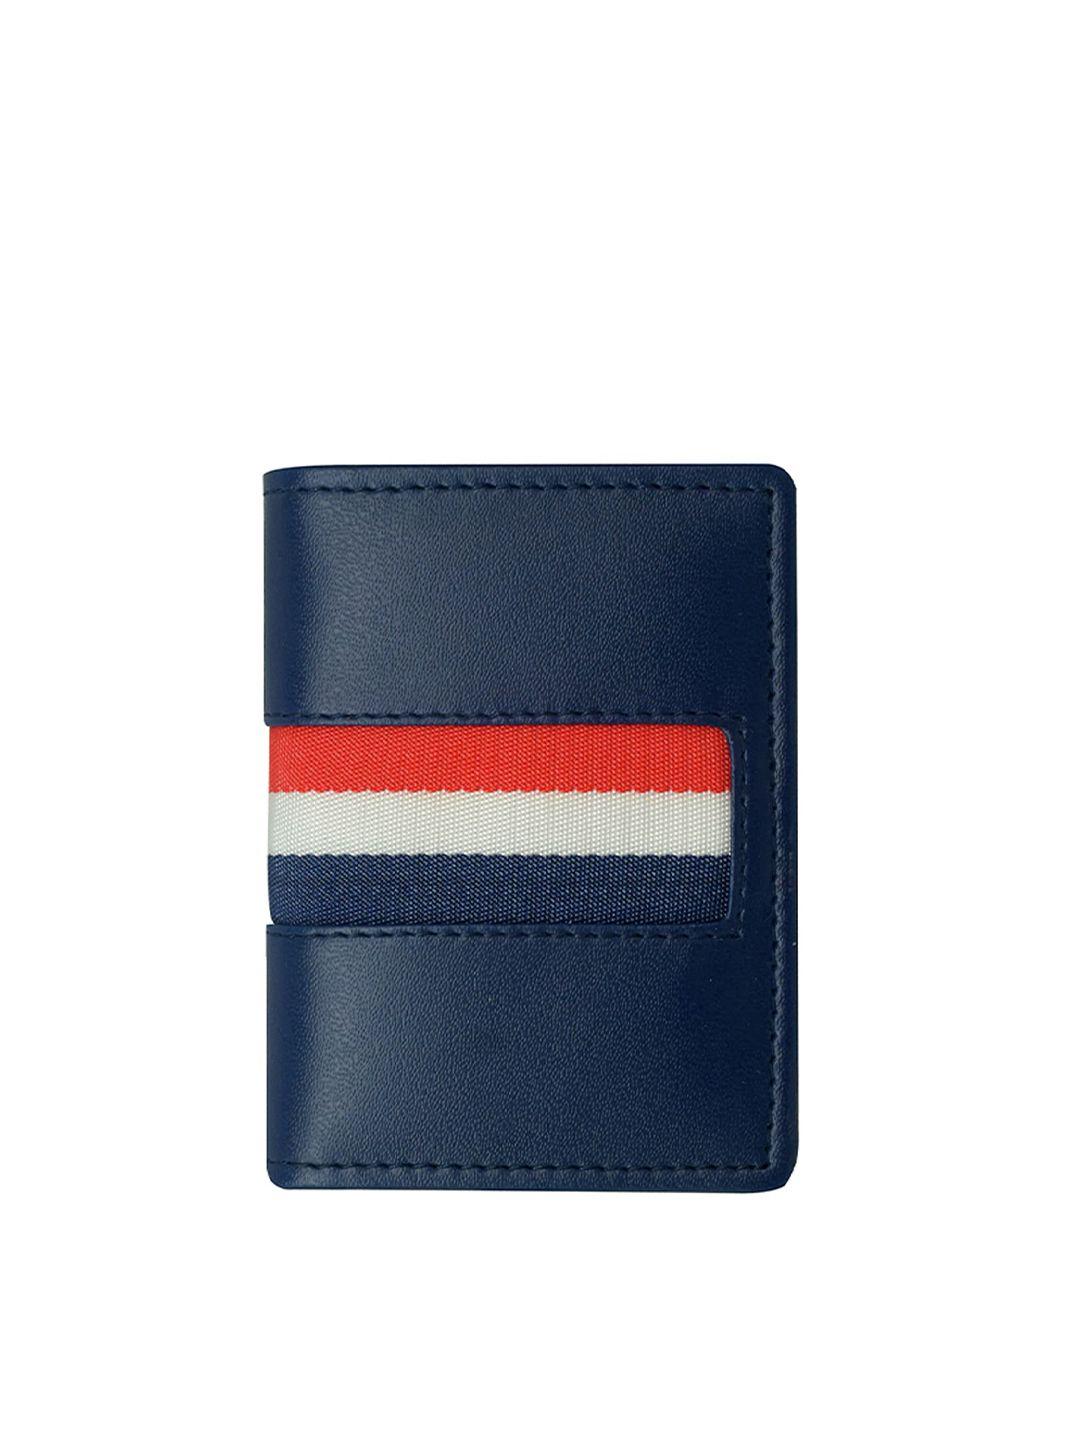 green dragonfly navy blue & red pu card holder